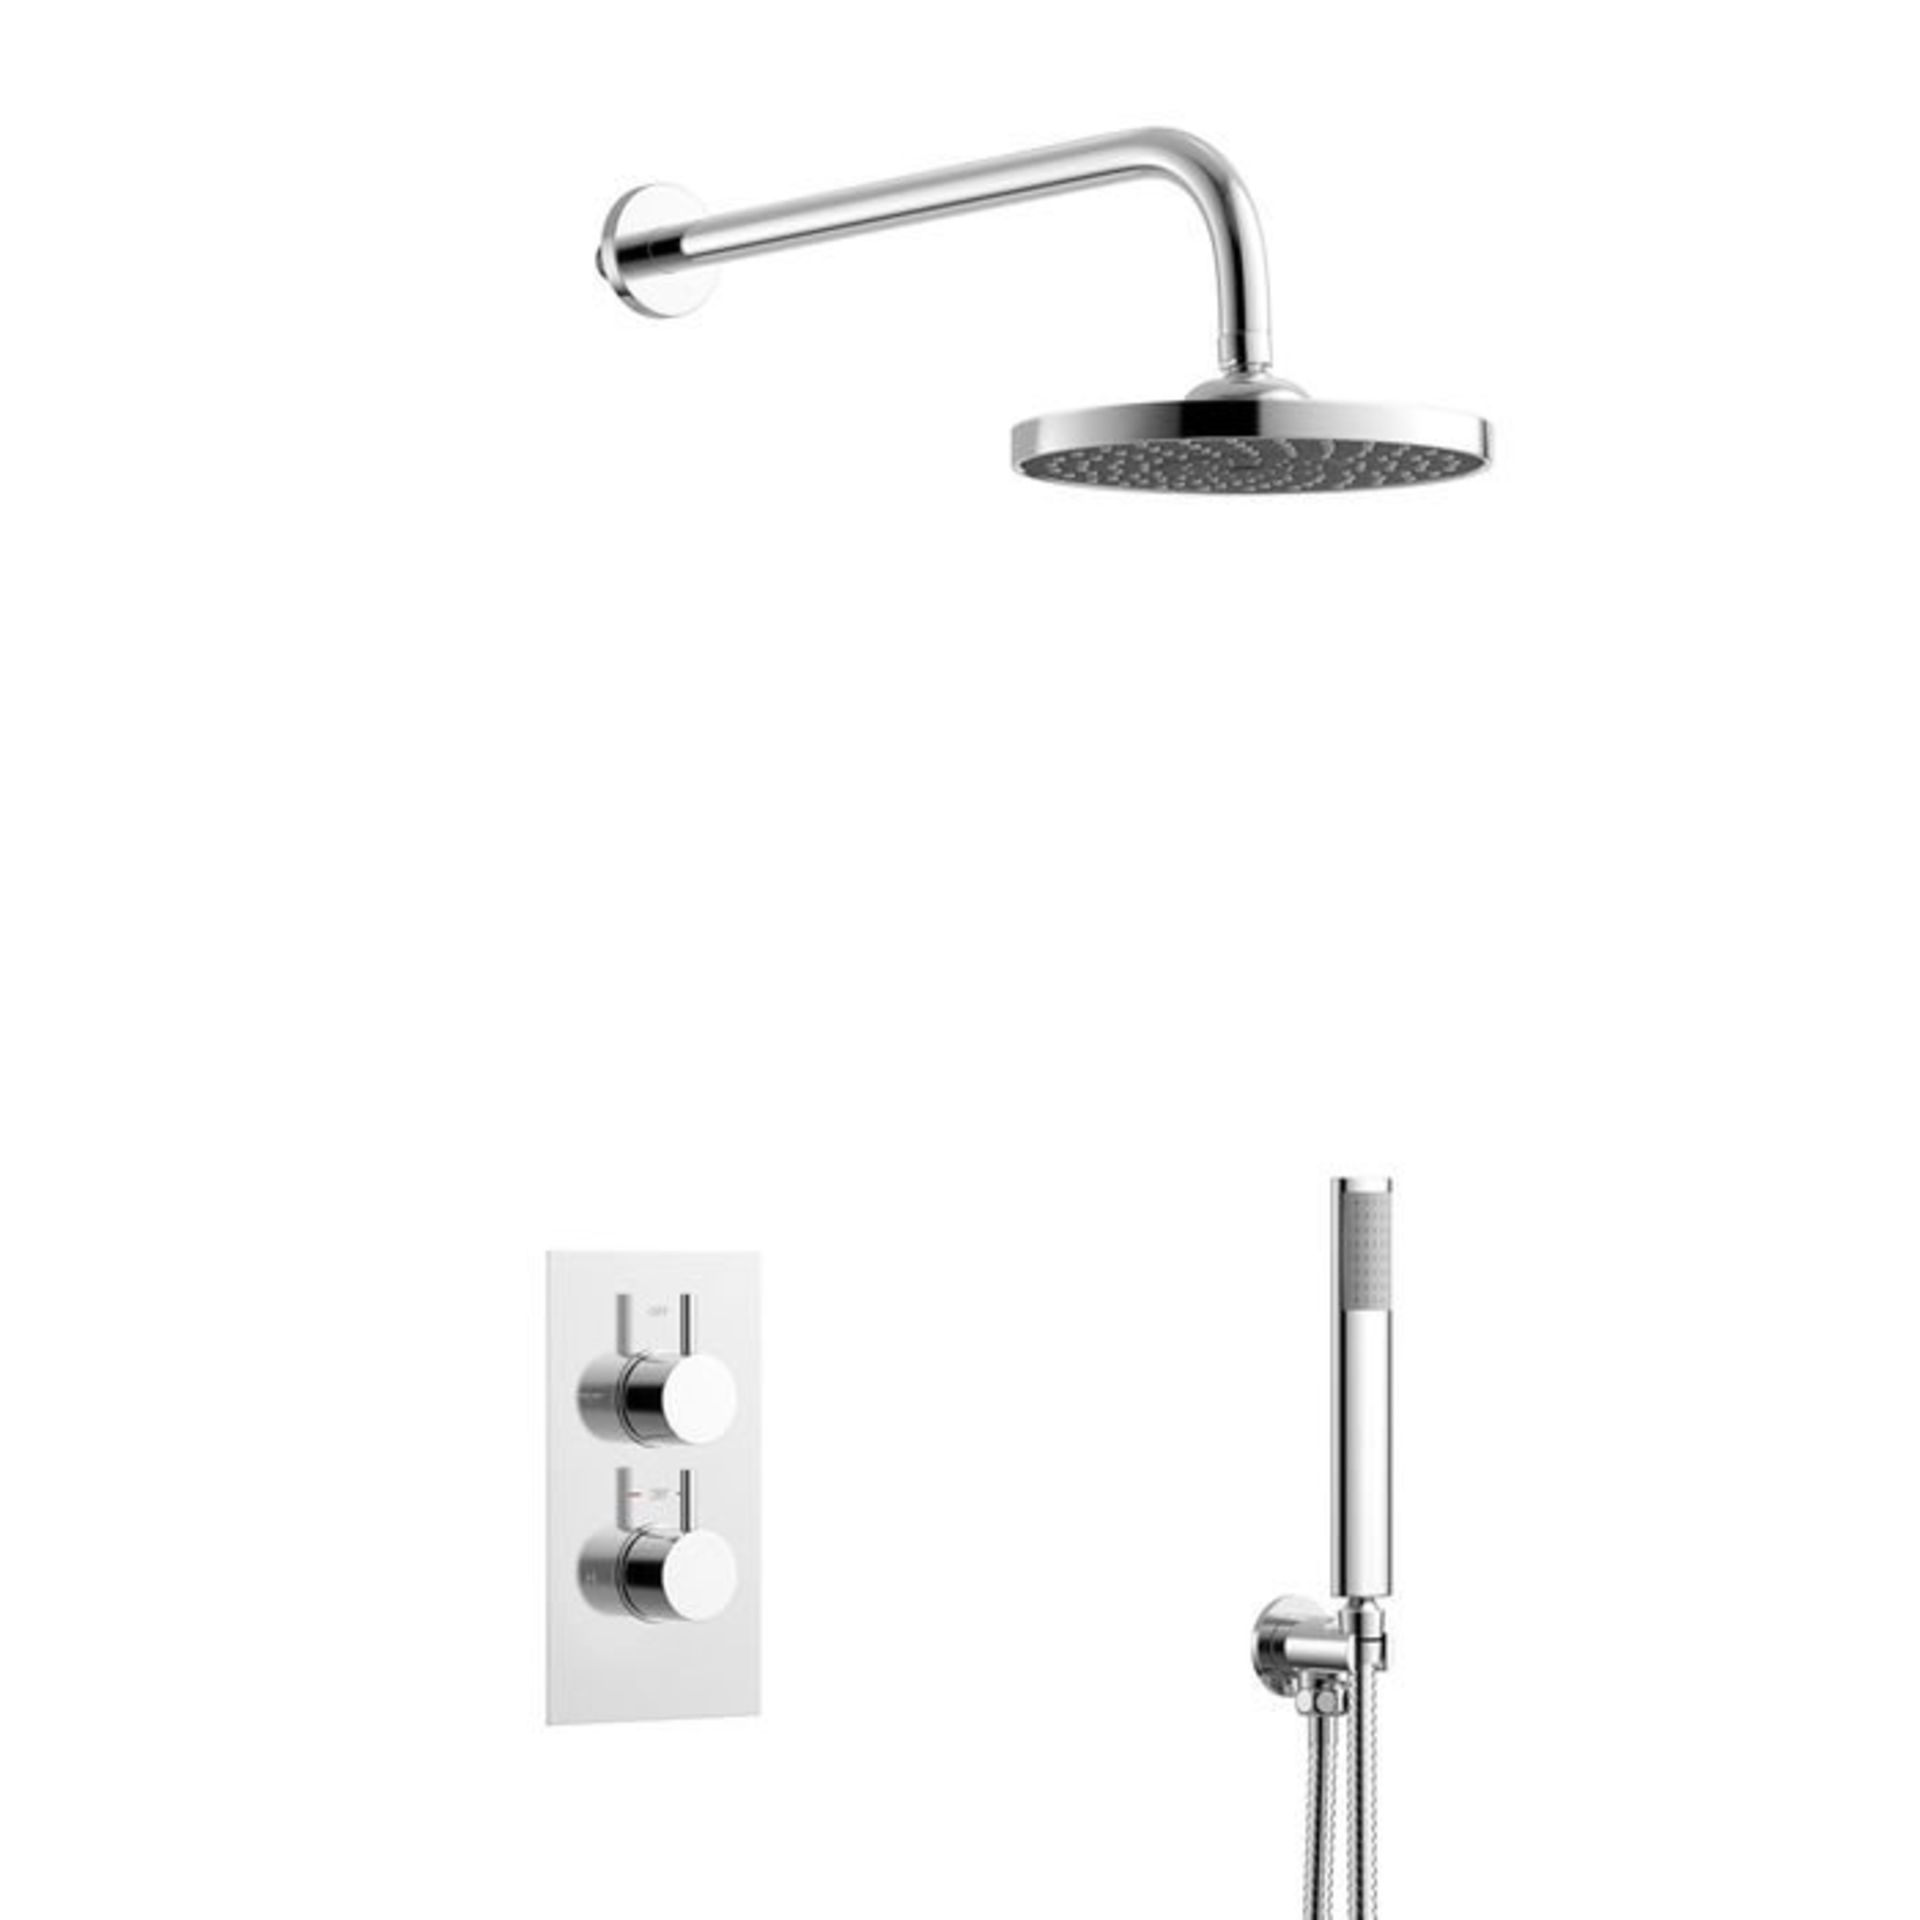 (H38) Round Concealed Thermostatic Mixer Shower Kit & Medium Head. Family friendly detachable hand - Image 5 of 6